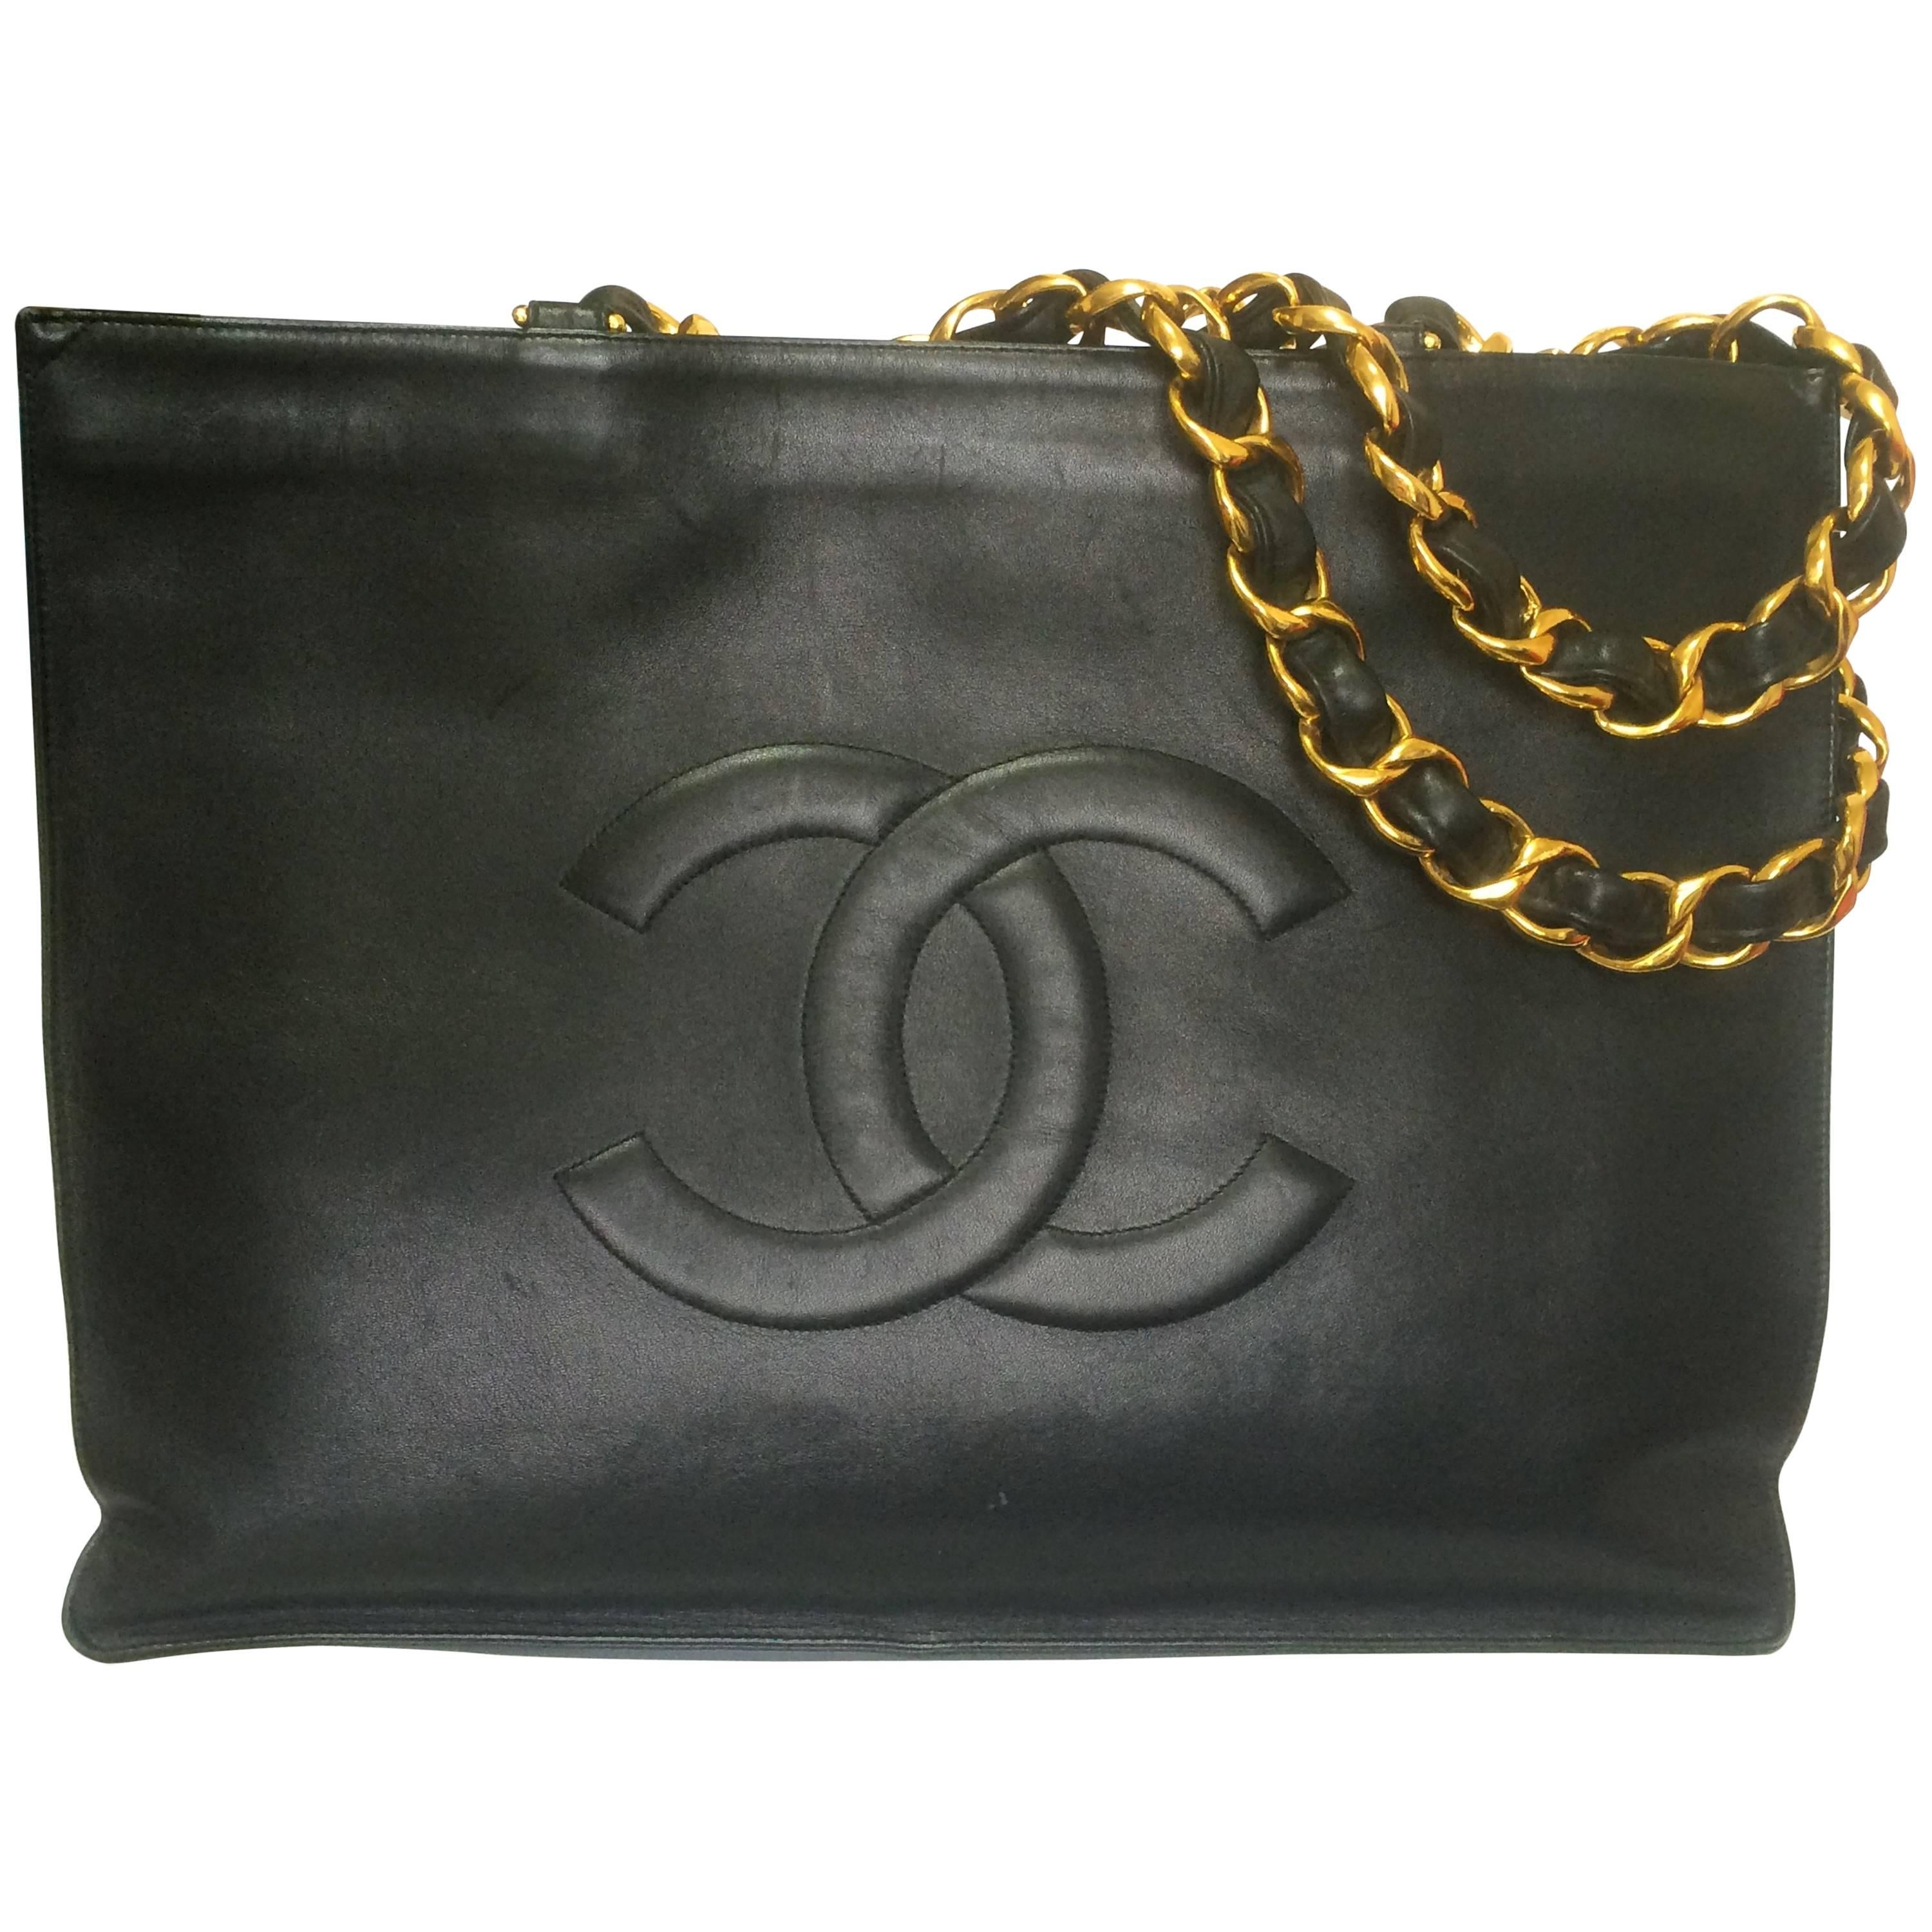 Vintage CHANEL black calfskin large tote bag with gold tone chain handles and CC